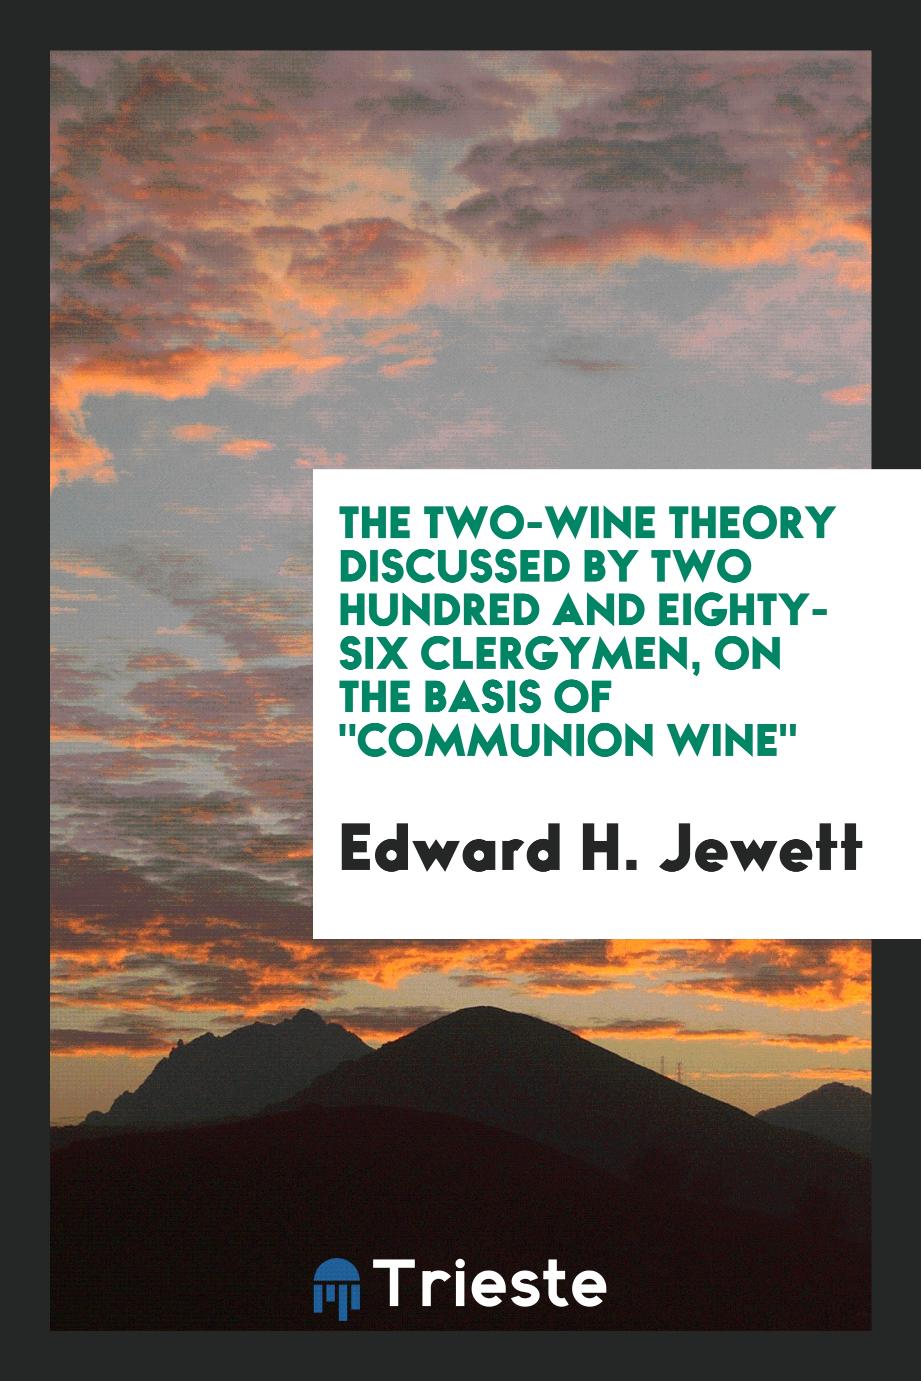 The Two-Wine Theory Discussed by Two Hundred and Eighty-Six Clergymen, on the Basis of "Communion Wine"